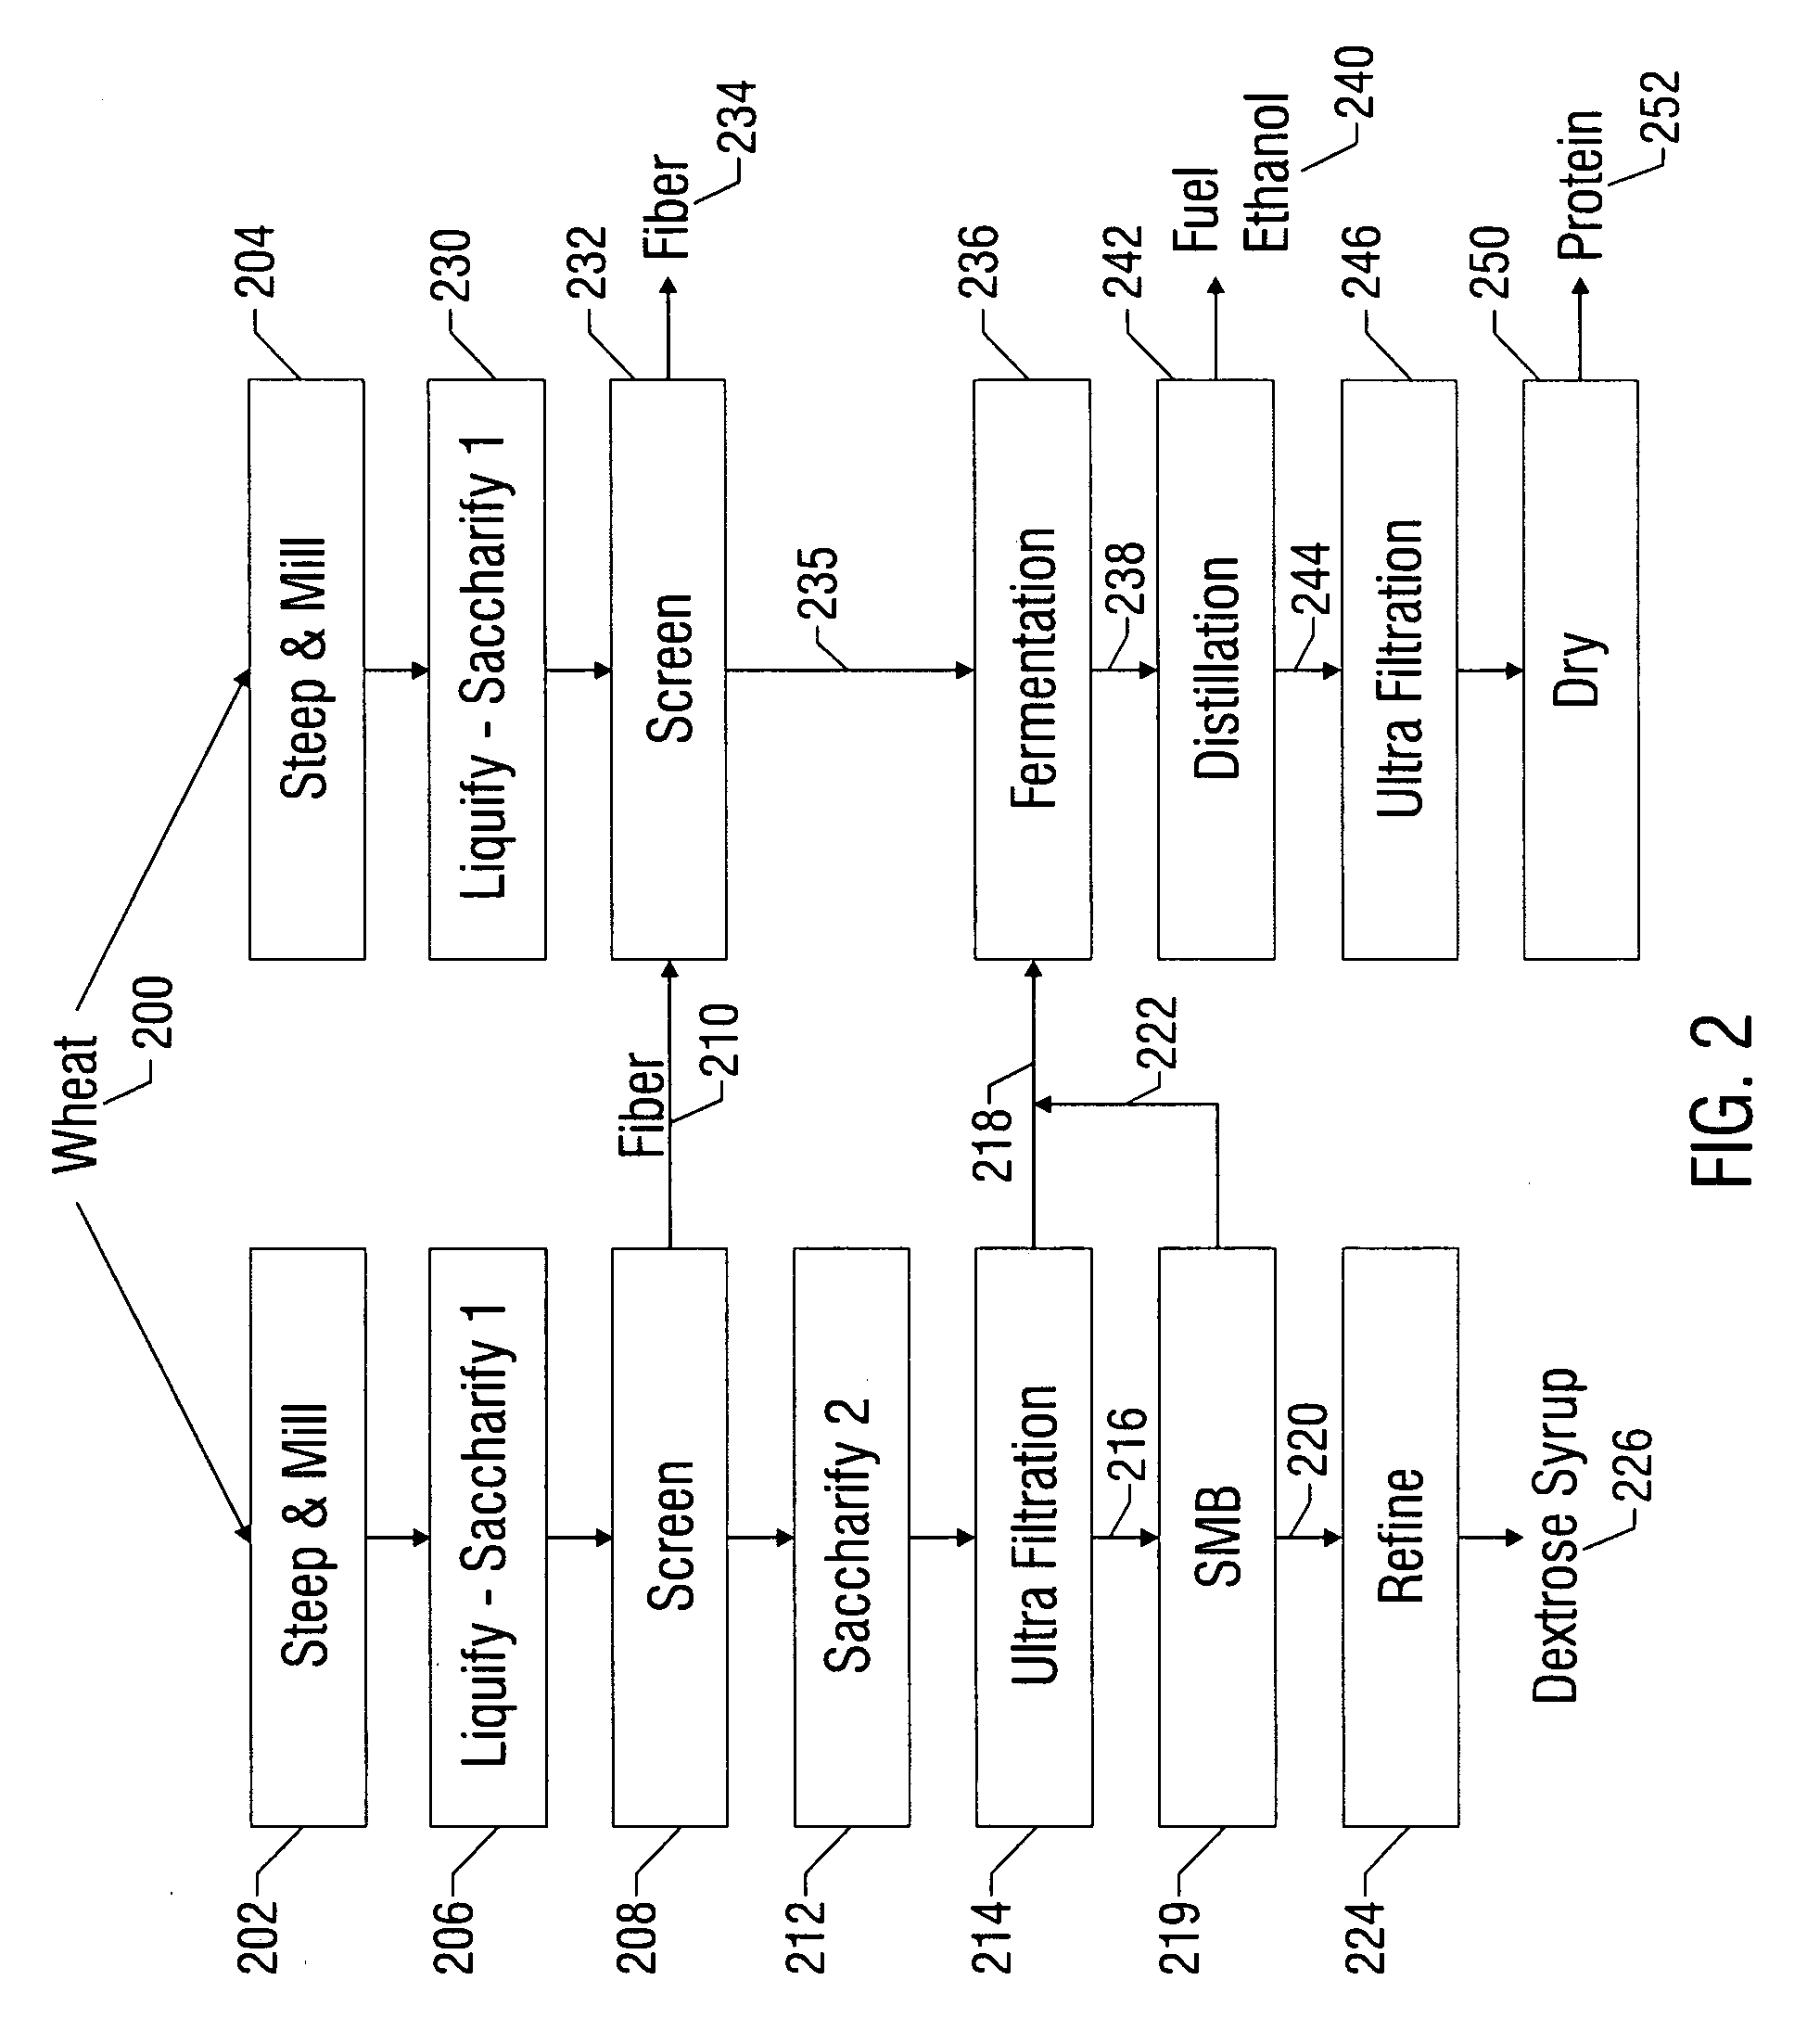 Grain wet milling process for producing ethanol